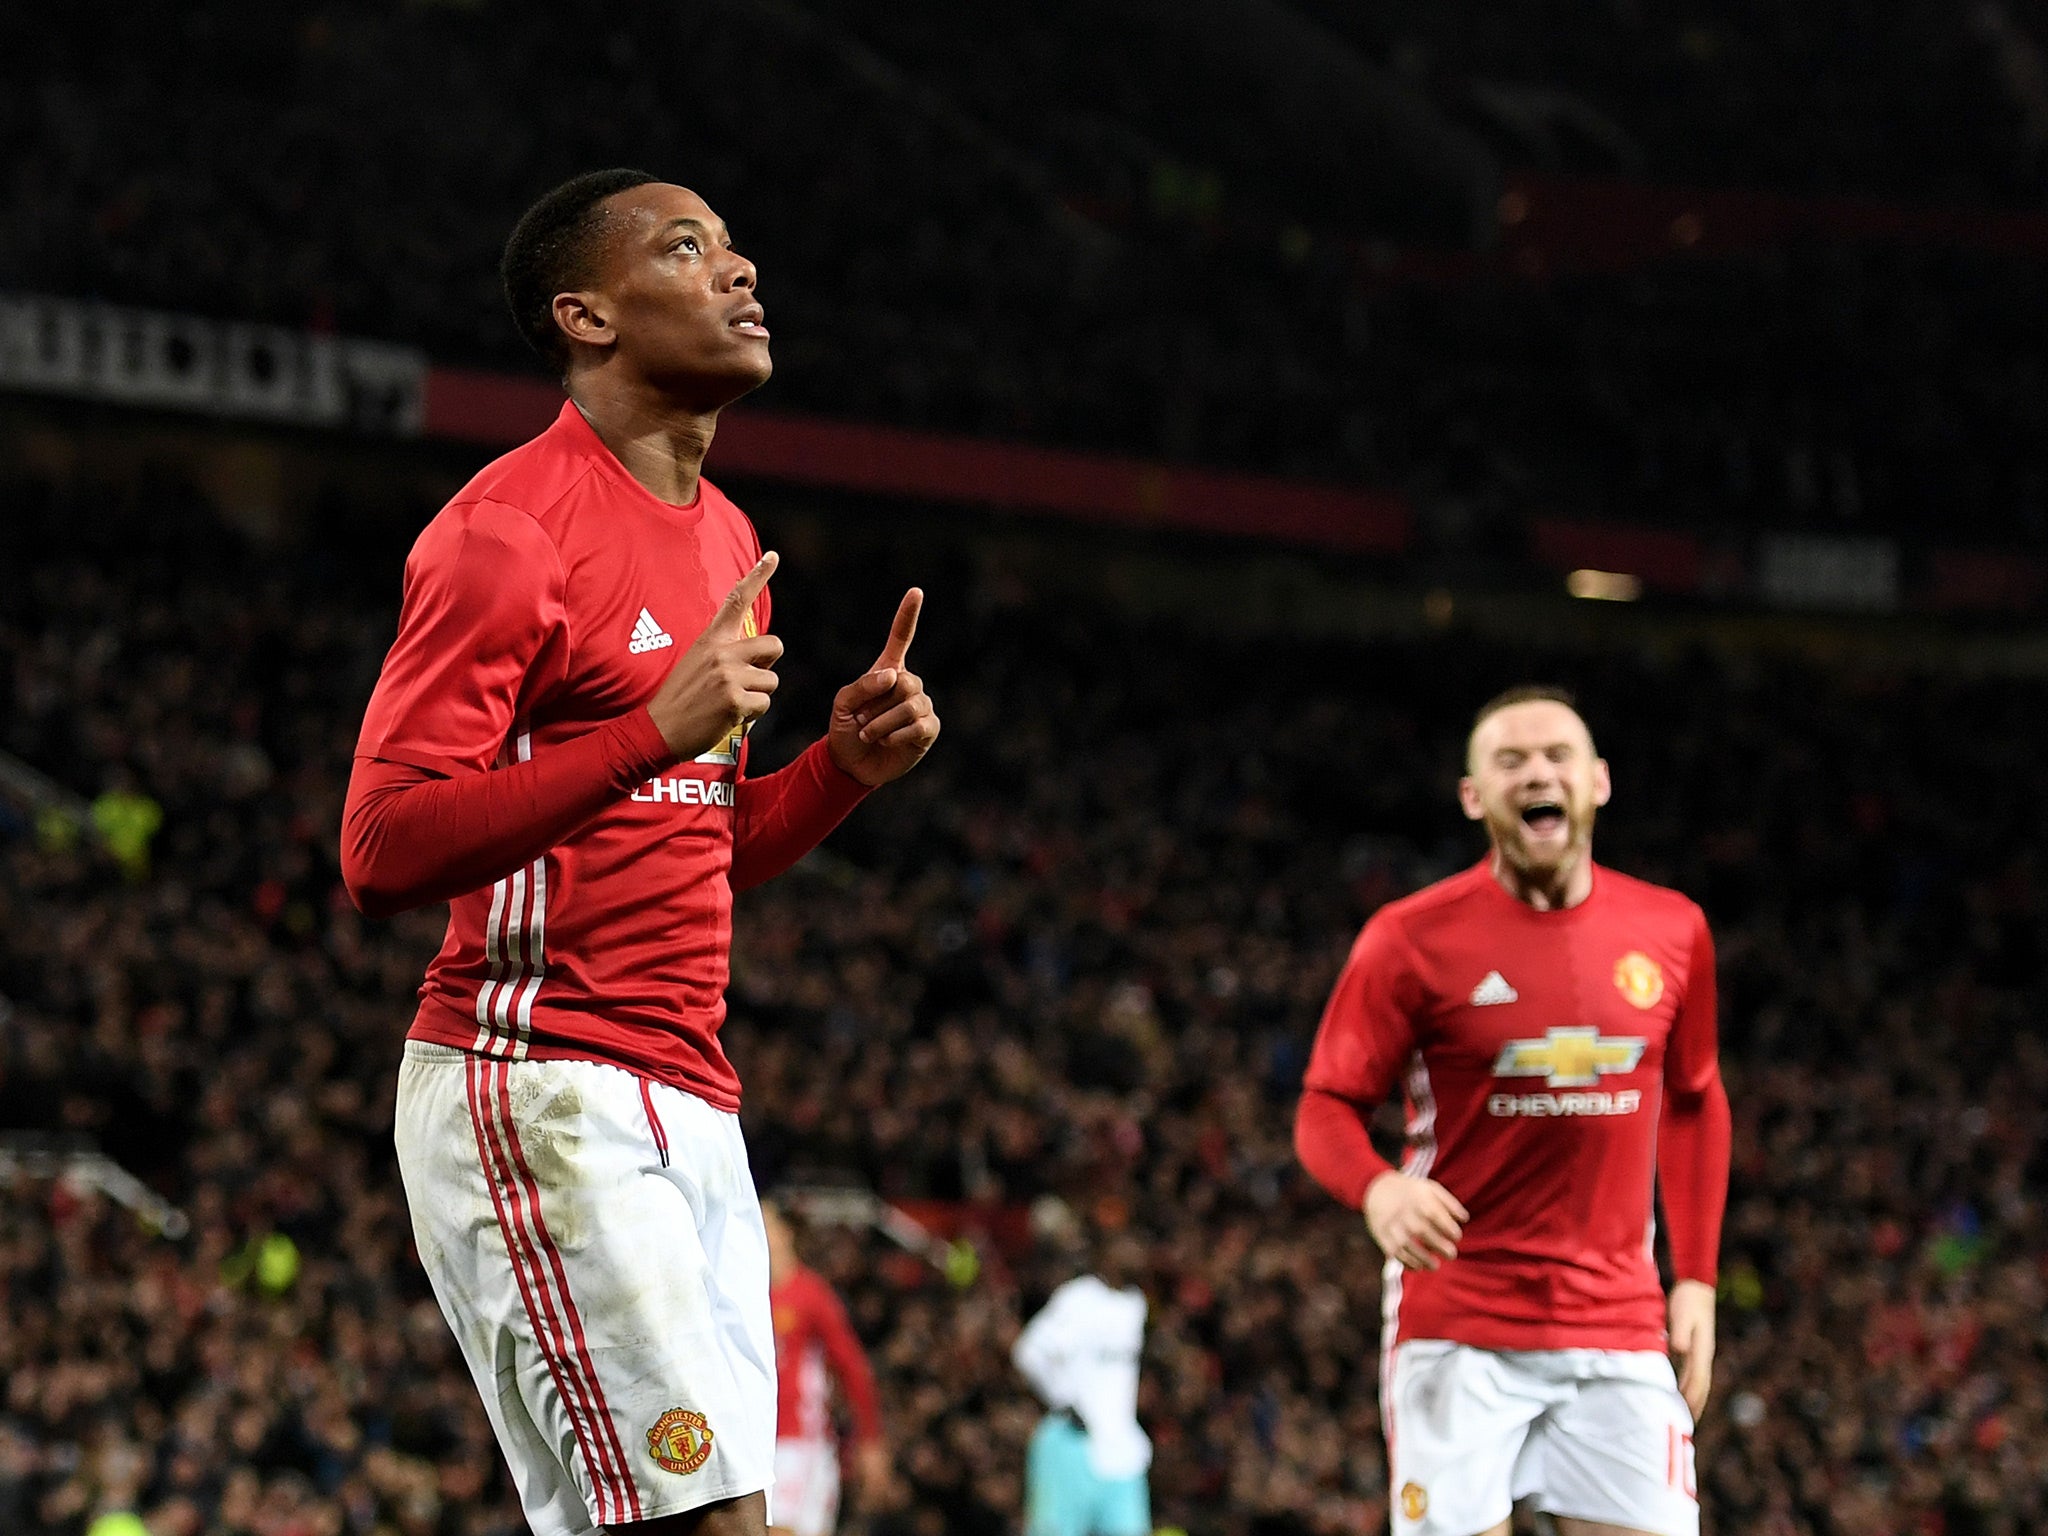 Martial doubled his tally for the season in one night, scoring twice on the night